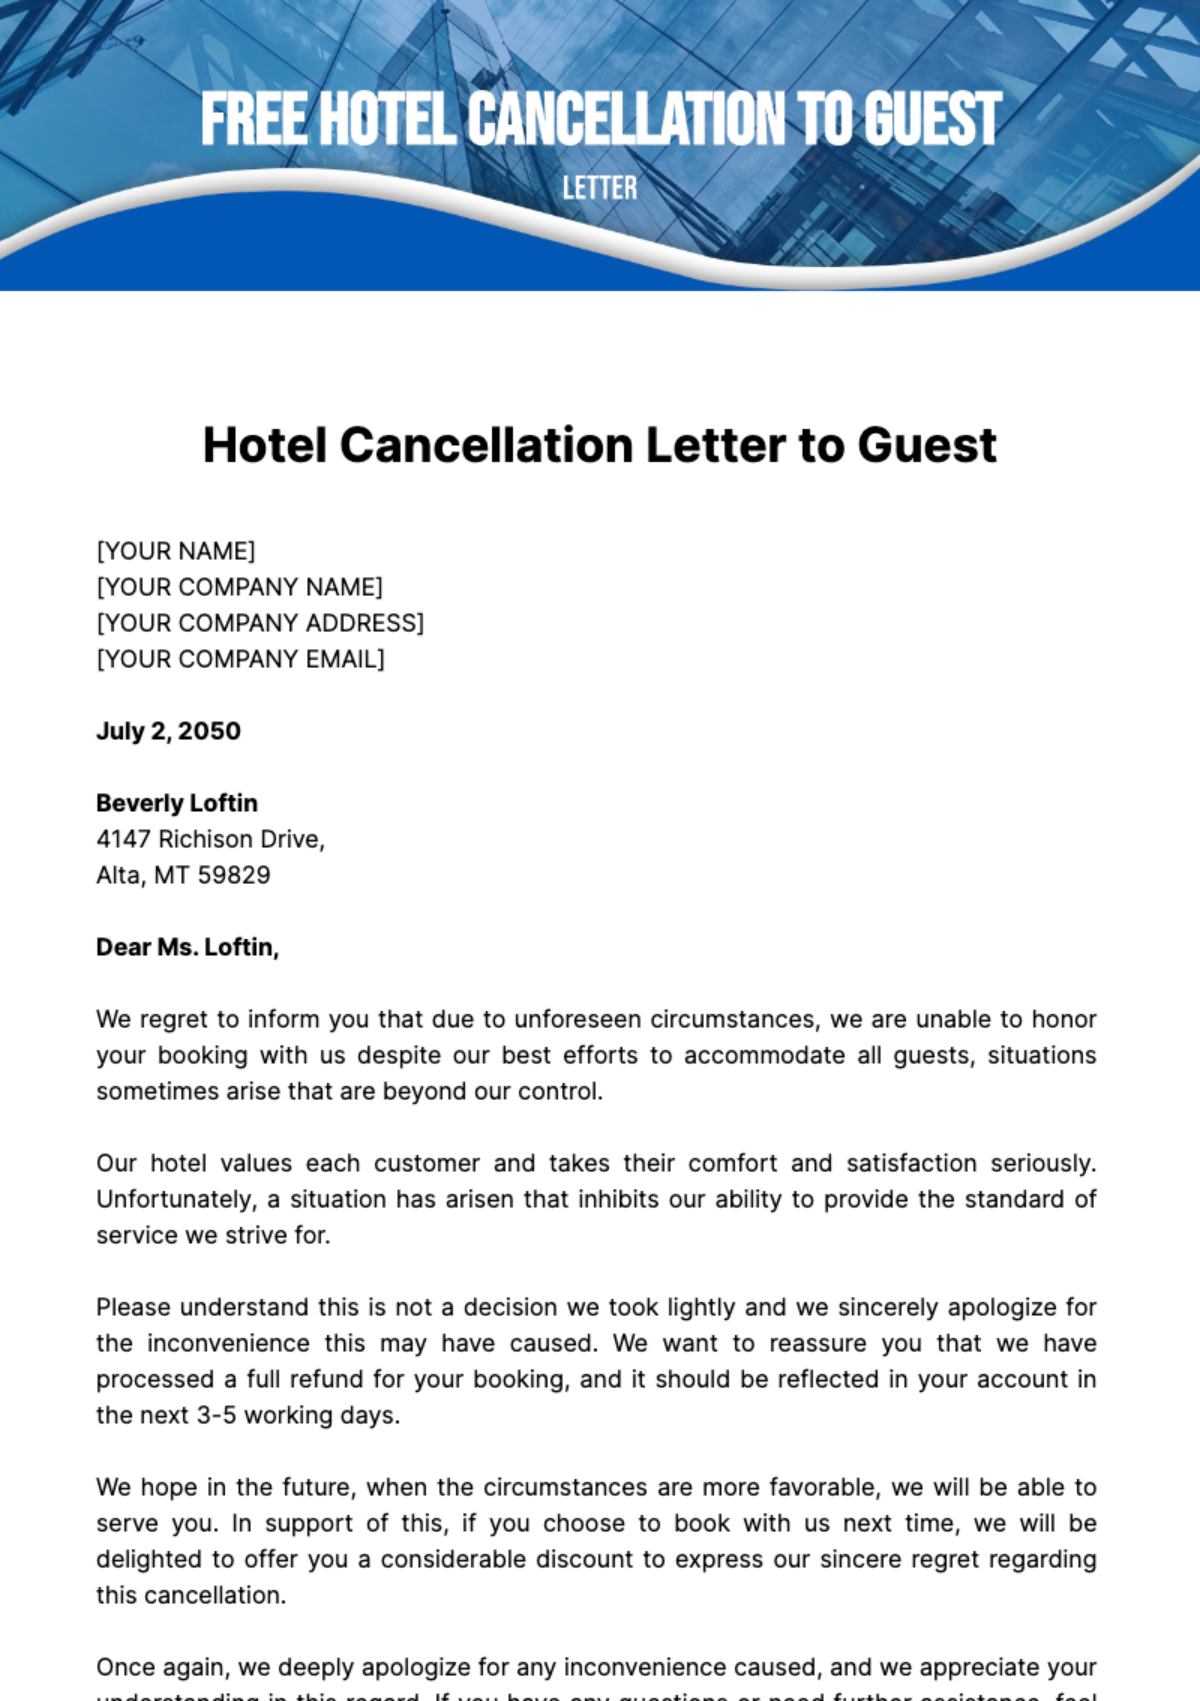 Free Hotel Cancellation Letter to Guest Template